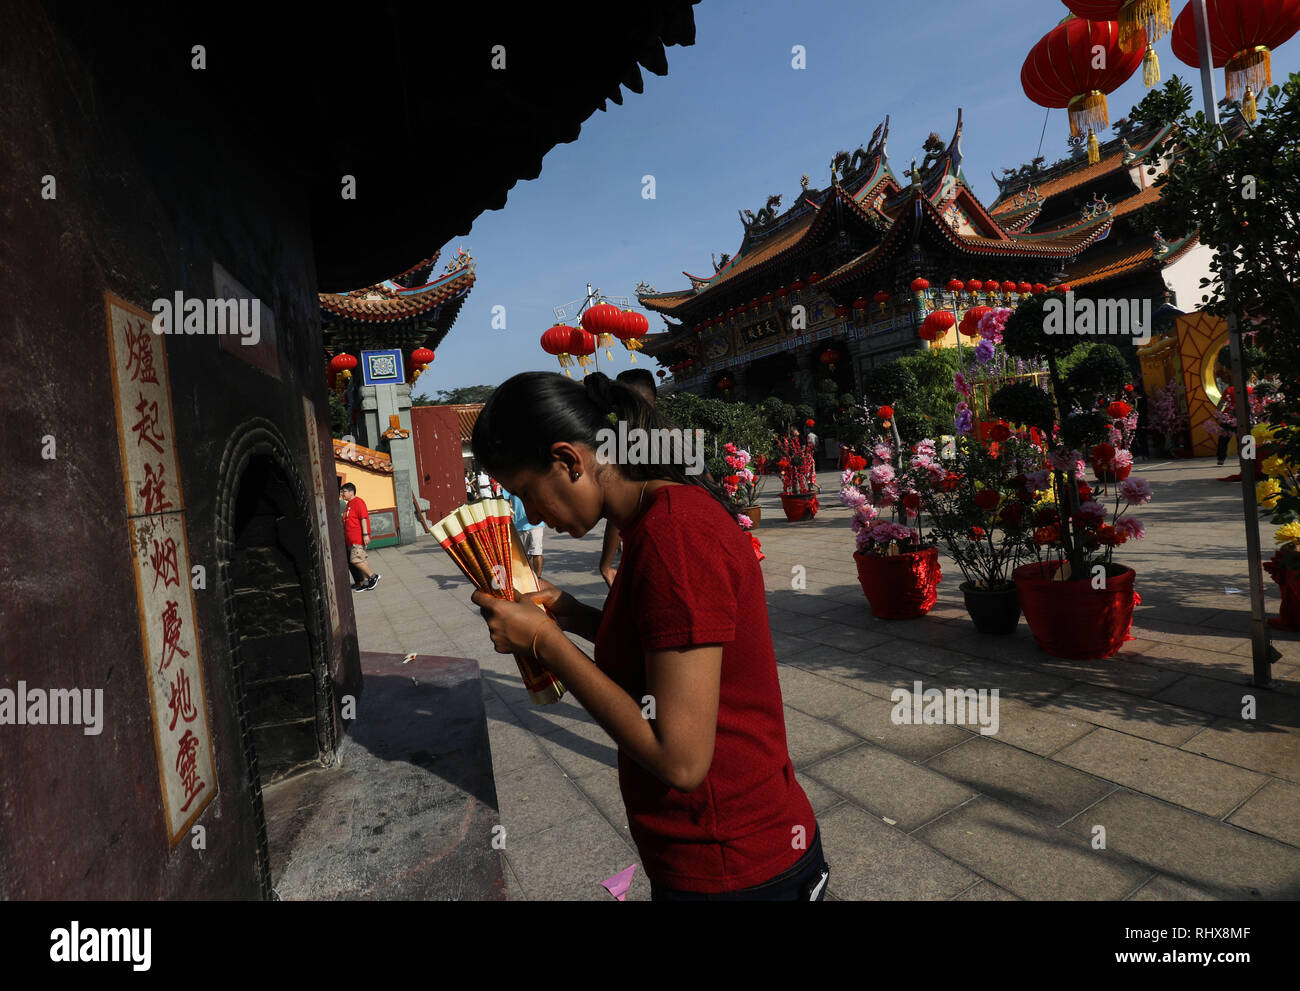 Klang, Selangor, Malaysia. 5th Feb, 2019. A women offer prayers before burn the incense paper in the temple during Chinese New Year. The Chinese Lunar New Year on February 5 will welcome the Year of the pig. Credit: Kepy/ZUMA Wire/Alamy Live News Stock Photo